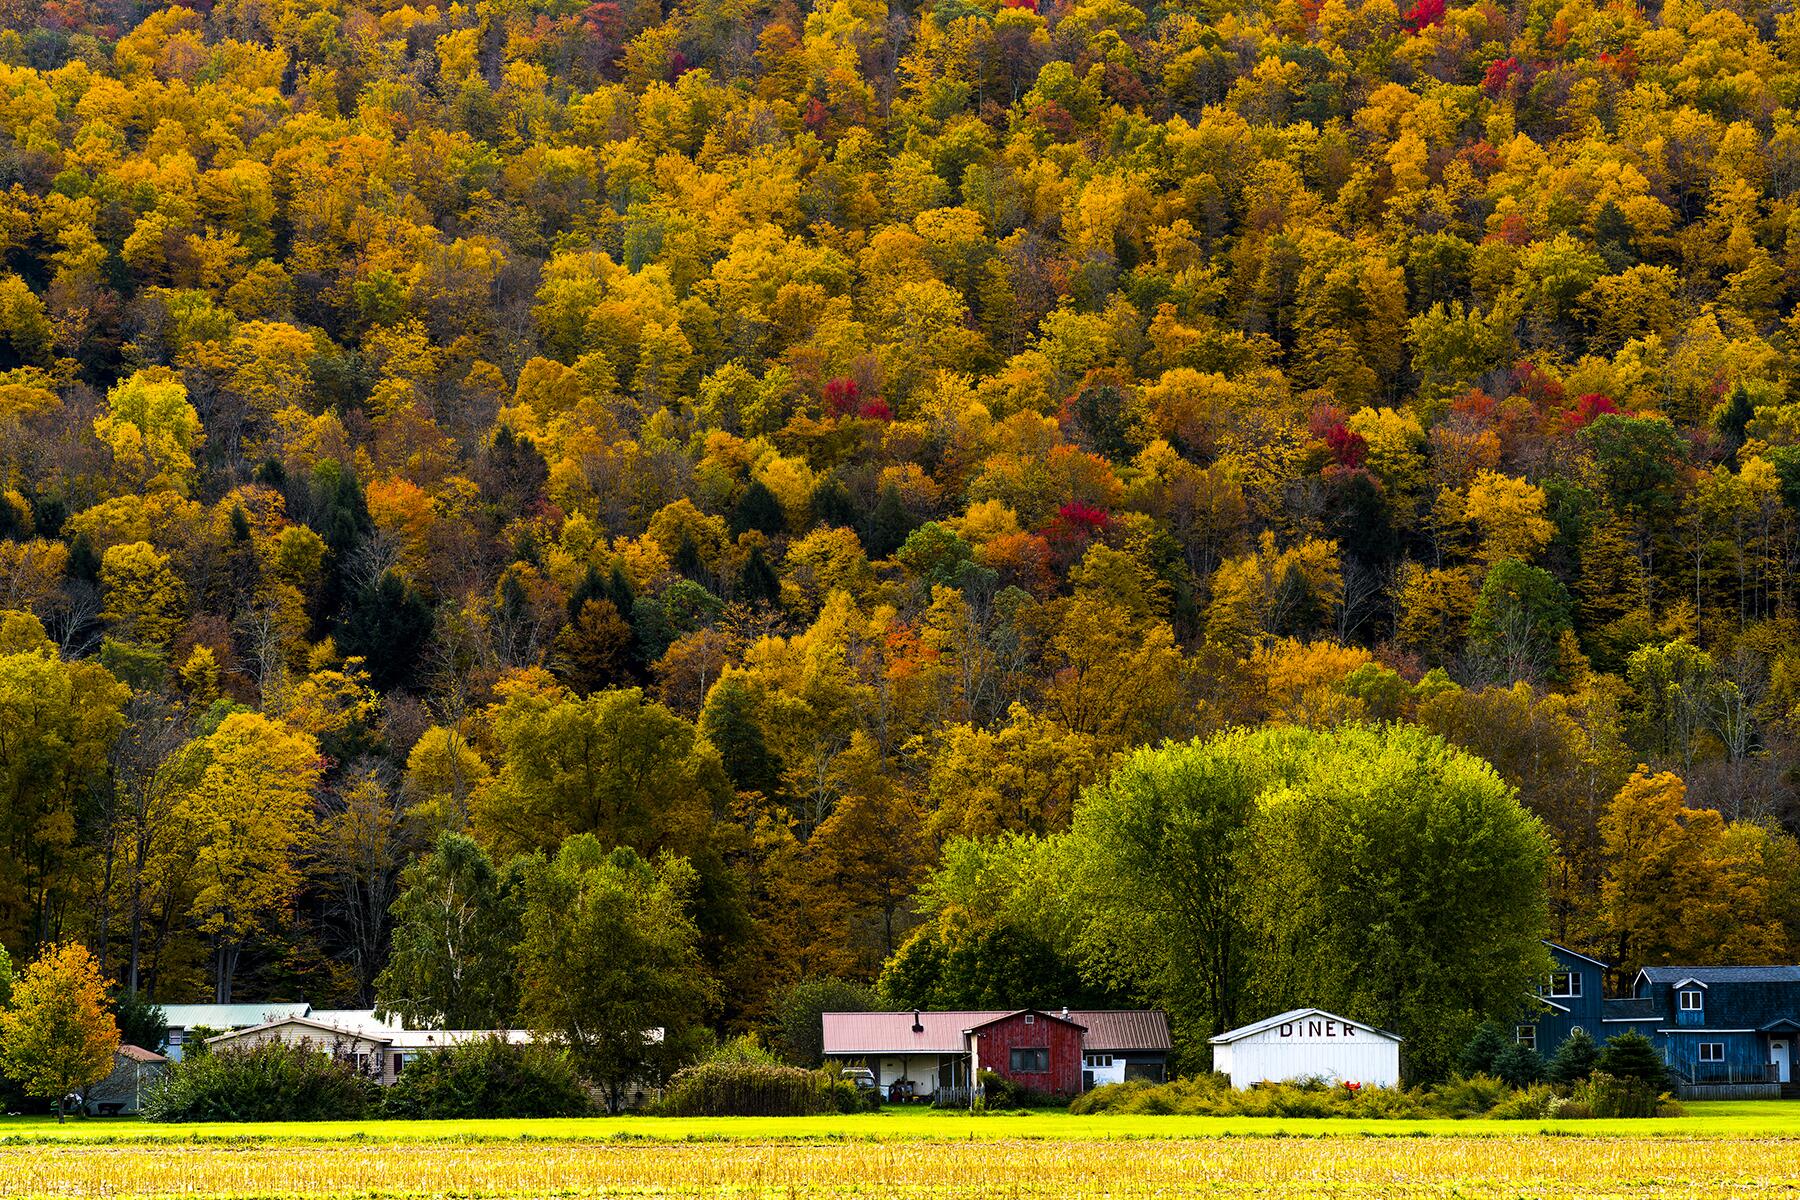 <a href='https://www.fodors.com/world/north-america/usa/new-york/new-york-city/experiences/news/photos/the-best-fall-day-trips-from-new-york-city#'>From &quot;The 10 Best Fall Day Trips From New York City: Catskills&quot;</a>